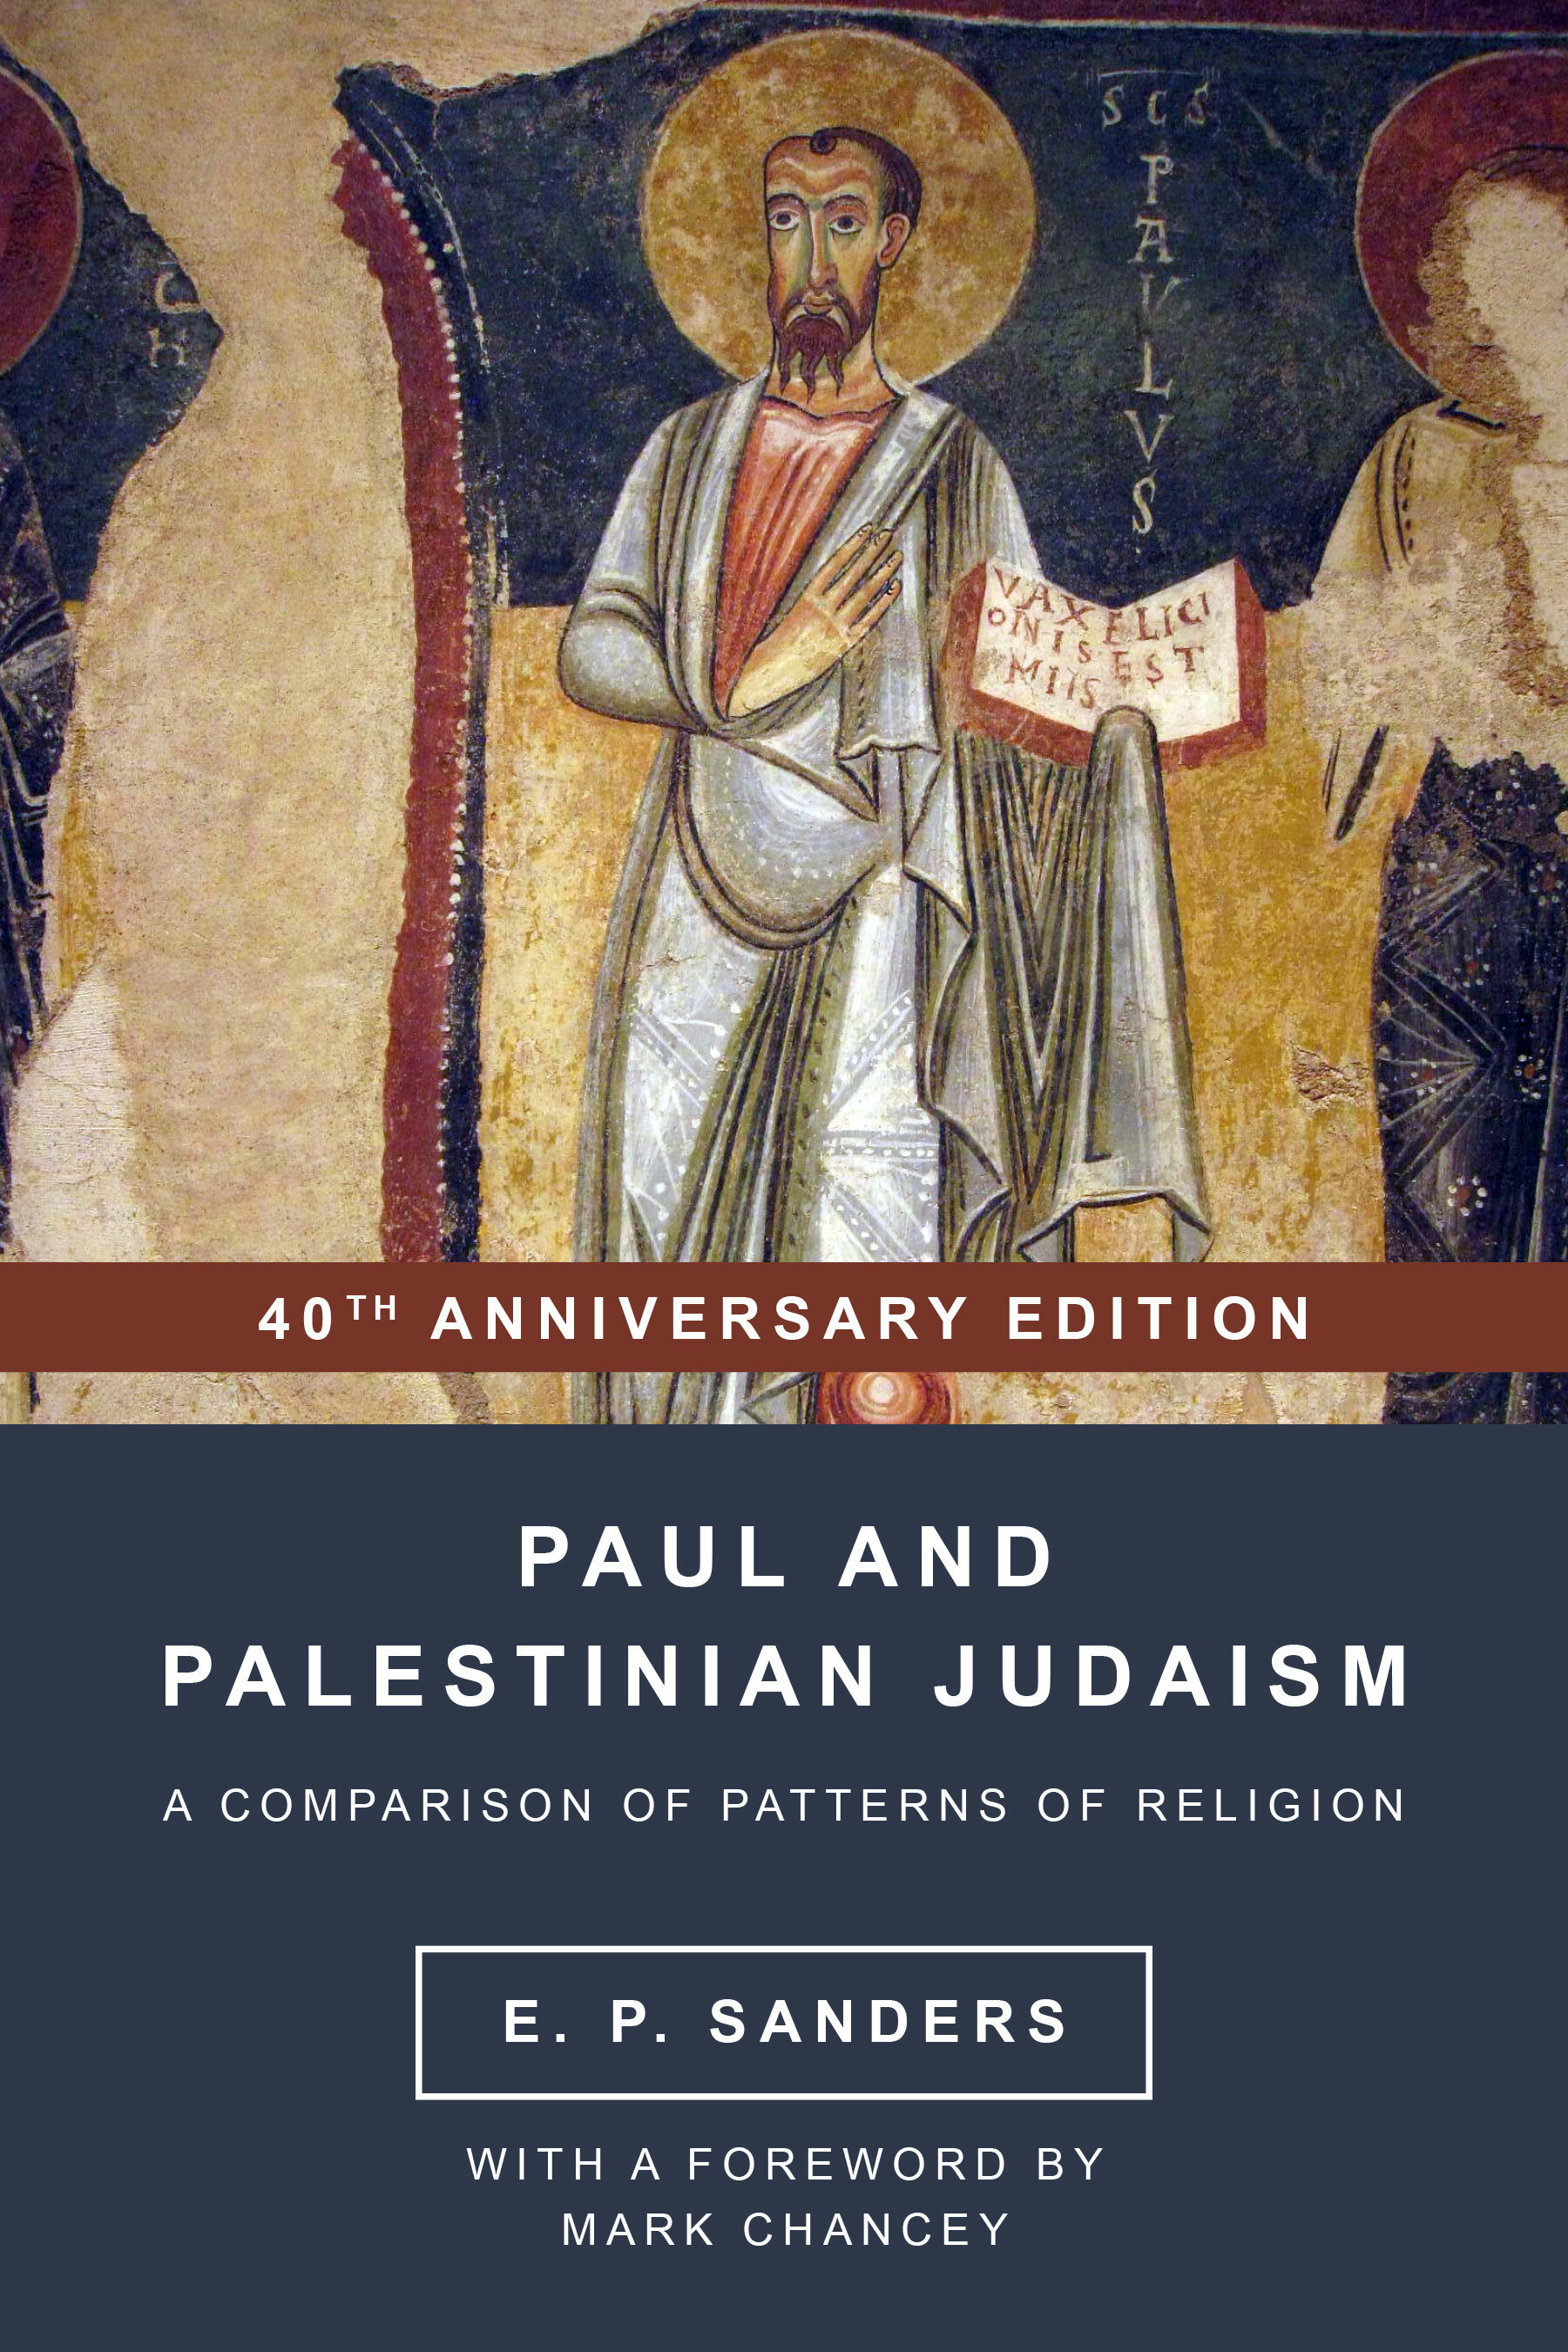 Paul and Palestinian Judaism: A Comparison of Patterns of Religion, 40th Anniversary Edition